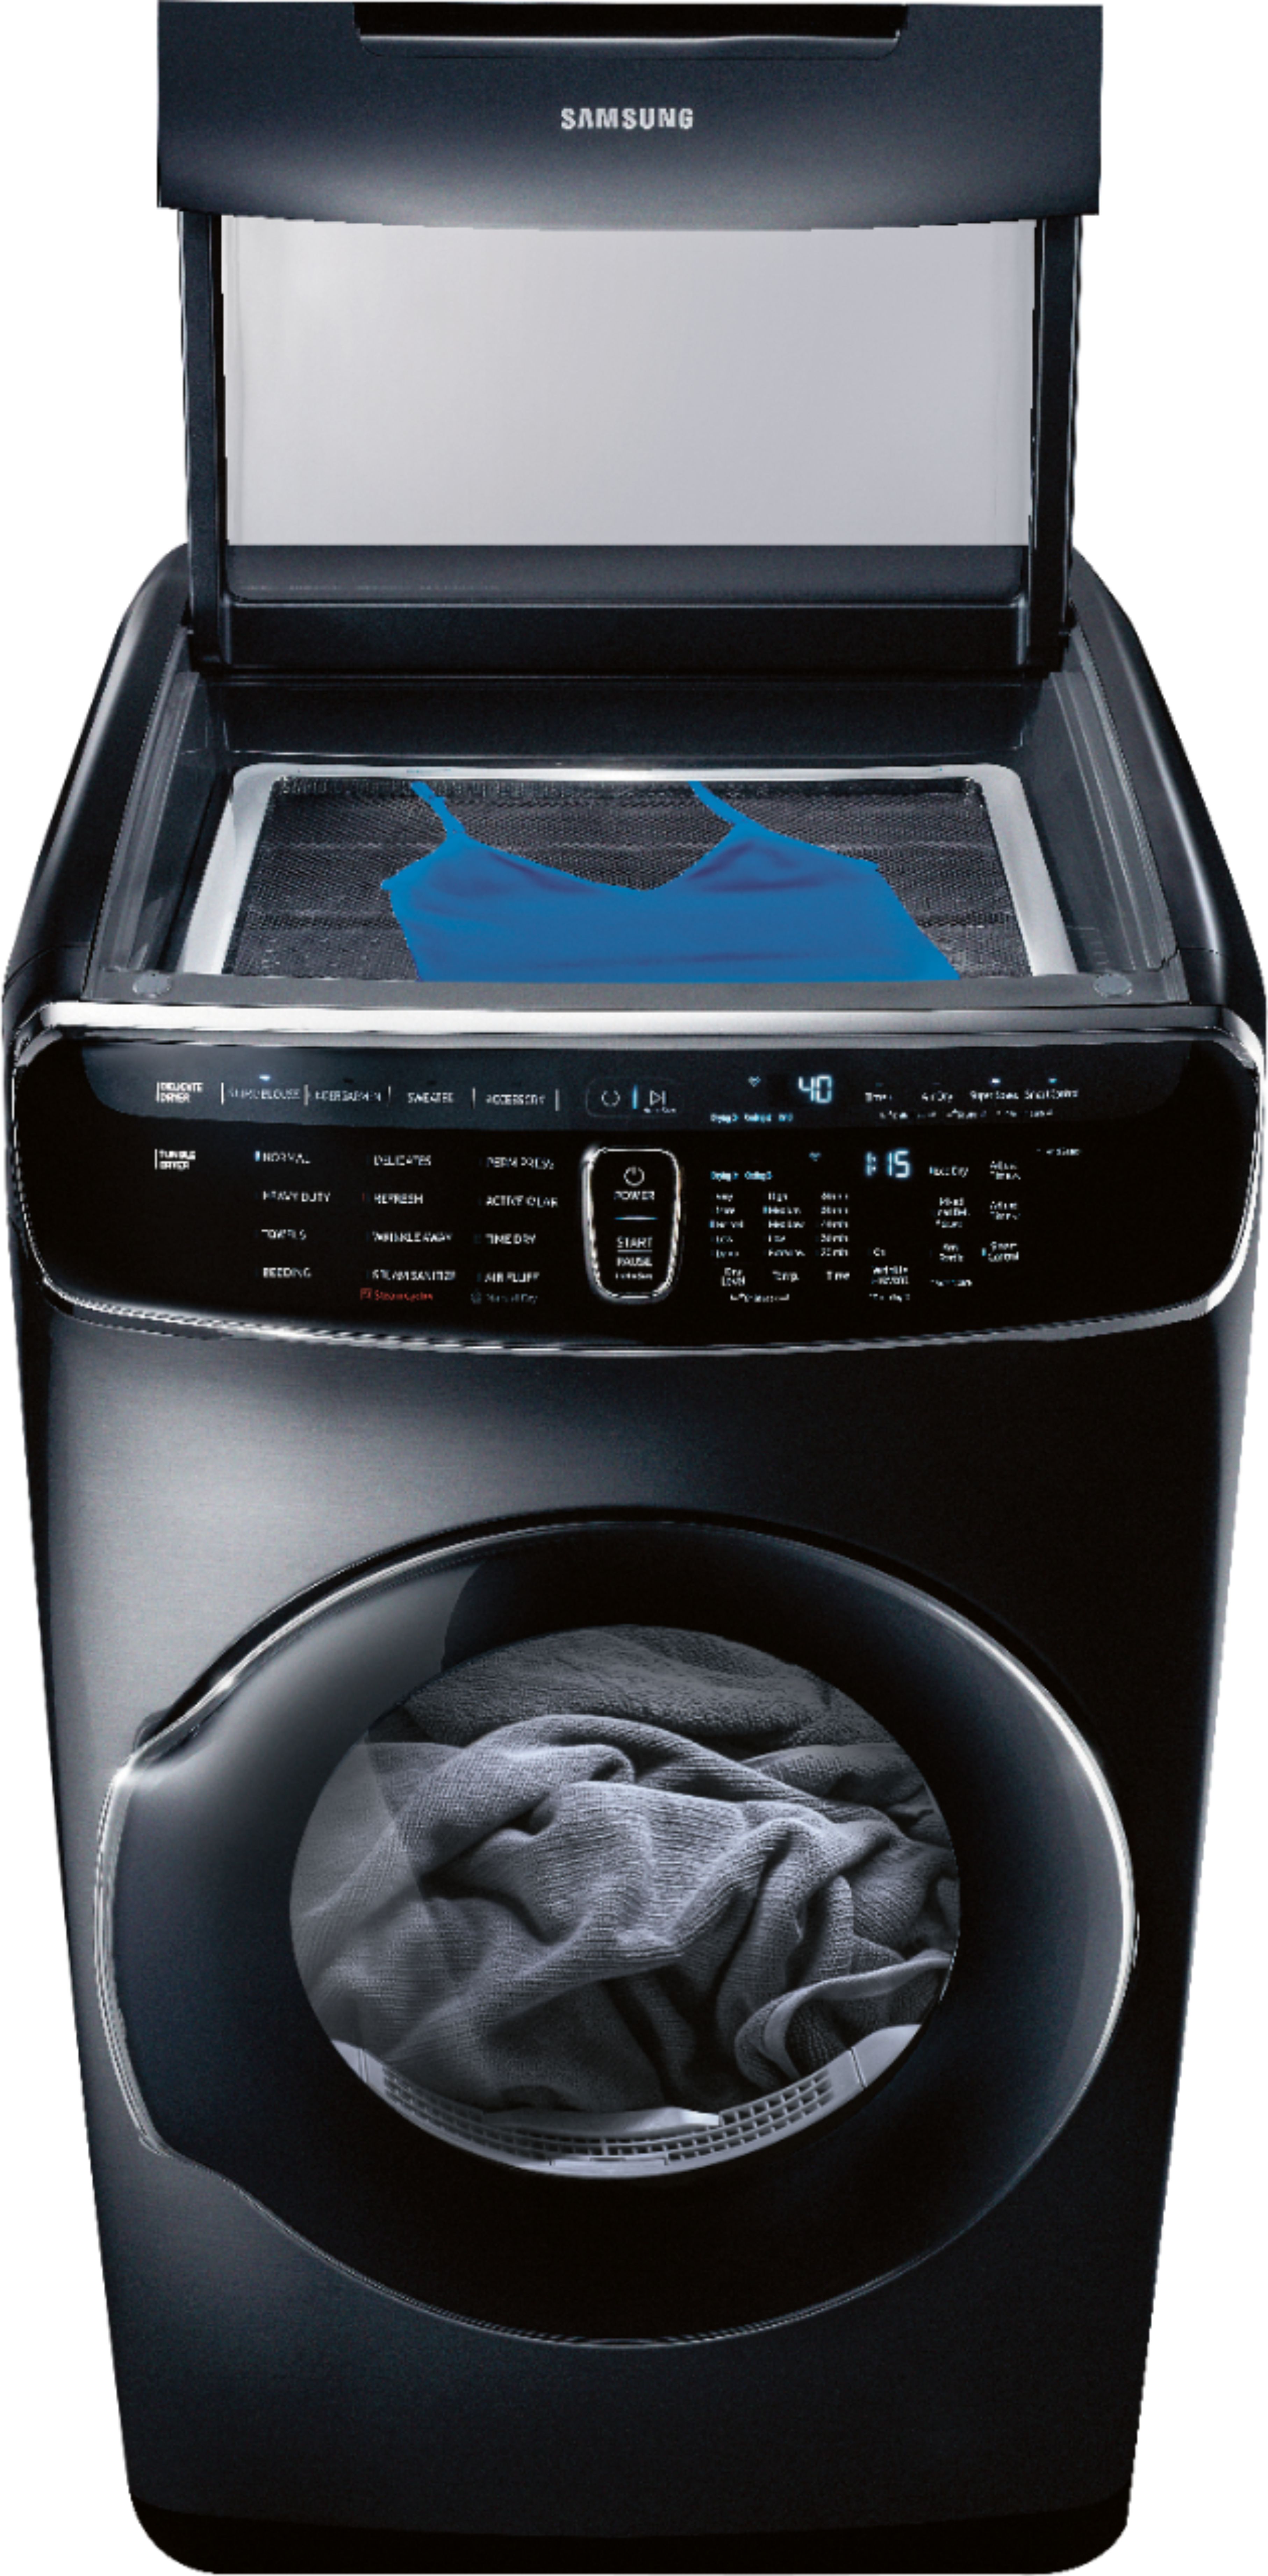 Samsung 7 5 Cu Ft Smart Electric Dryer With Steam And Flexdry Black Stainless Steel Dve60m9900v Best Buy